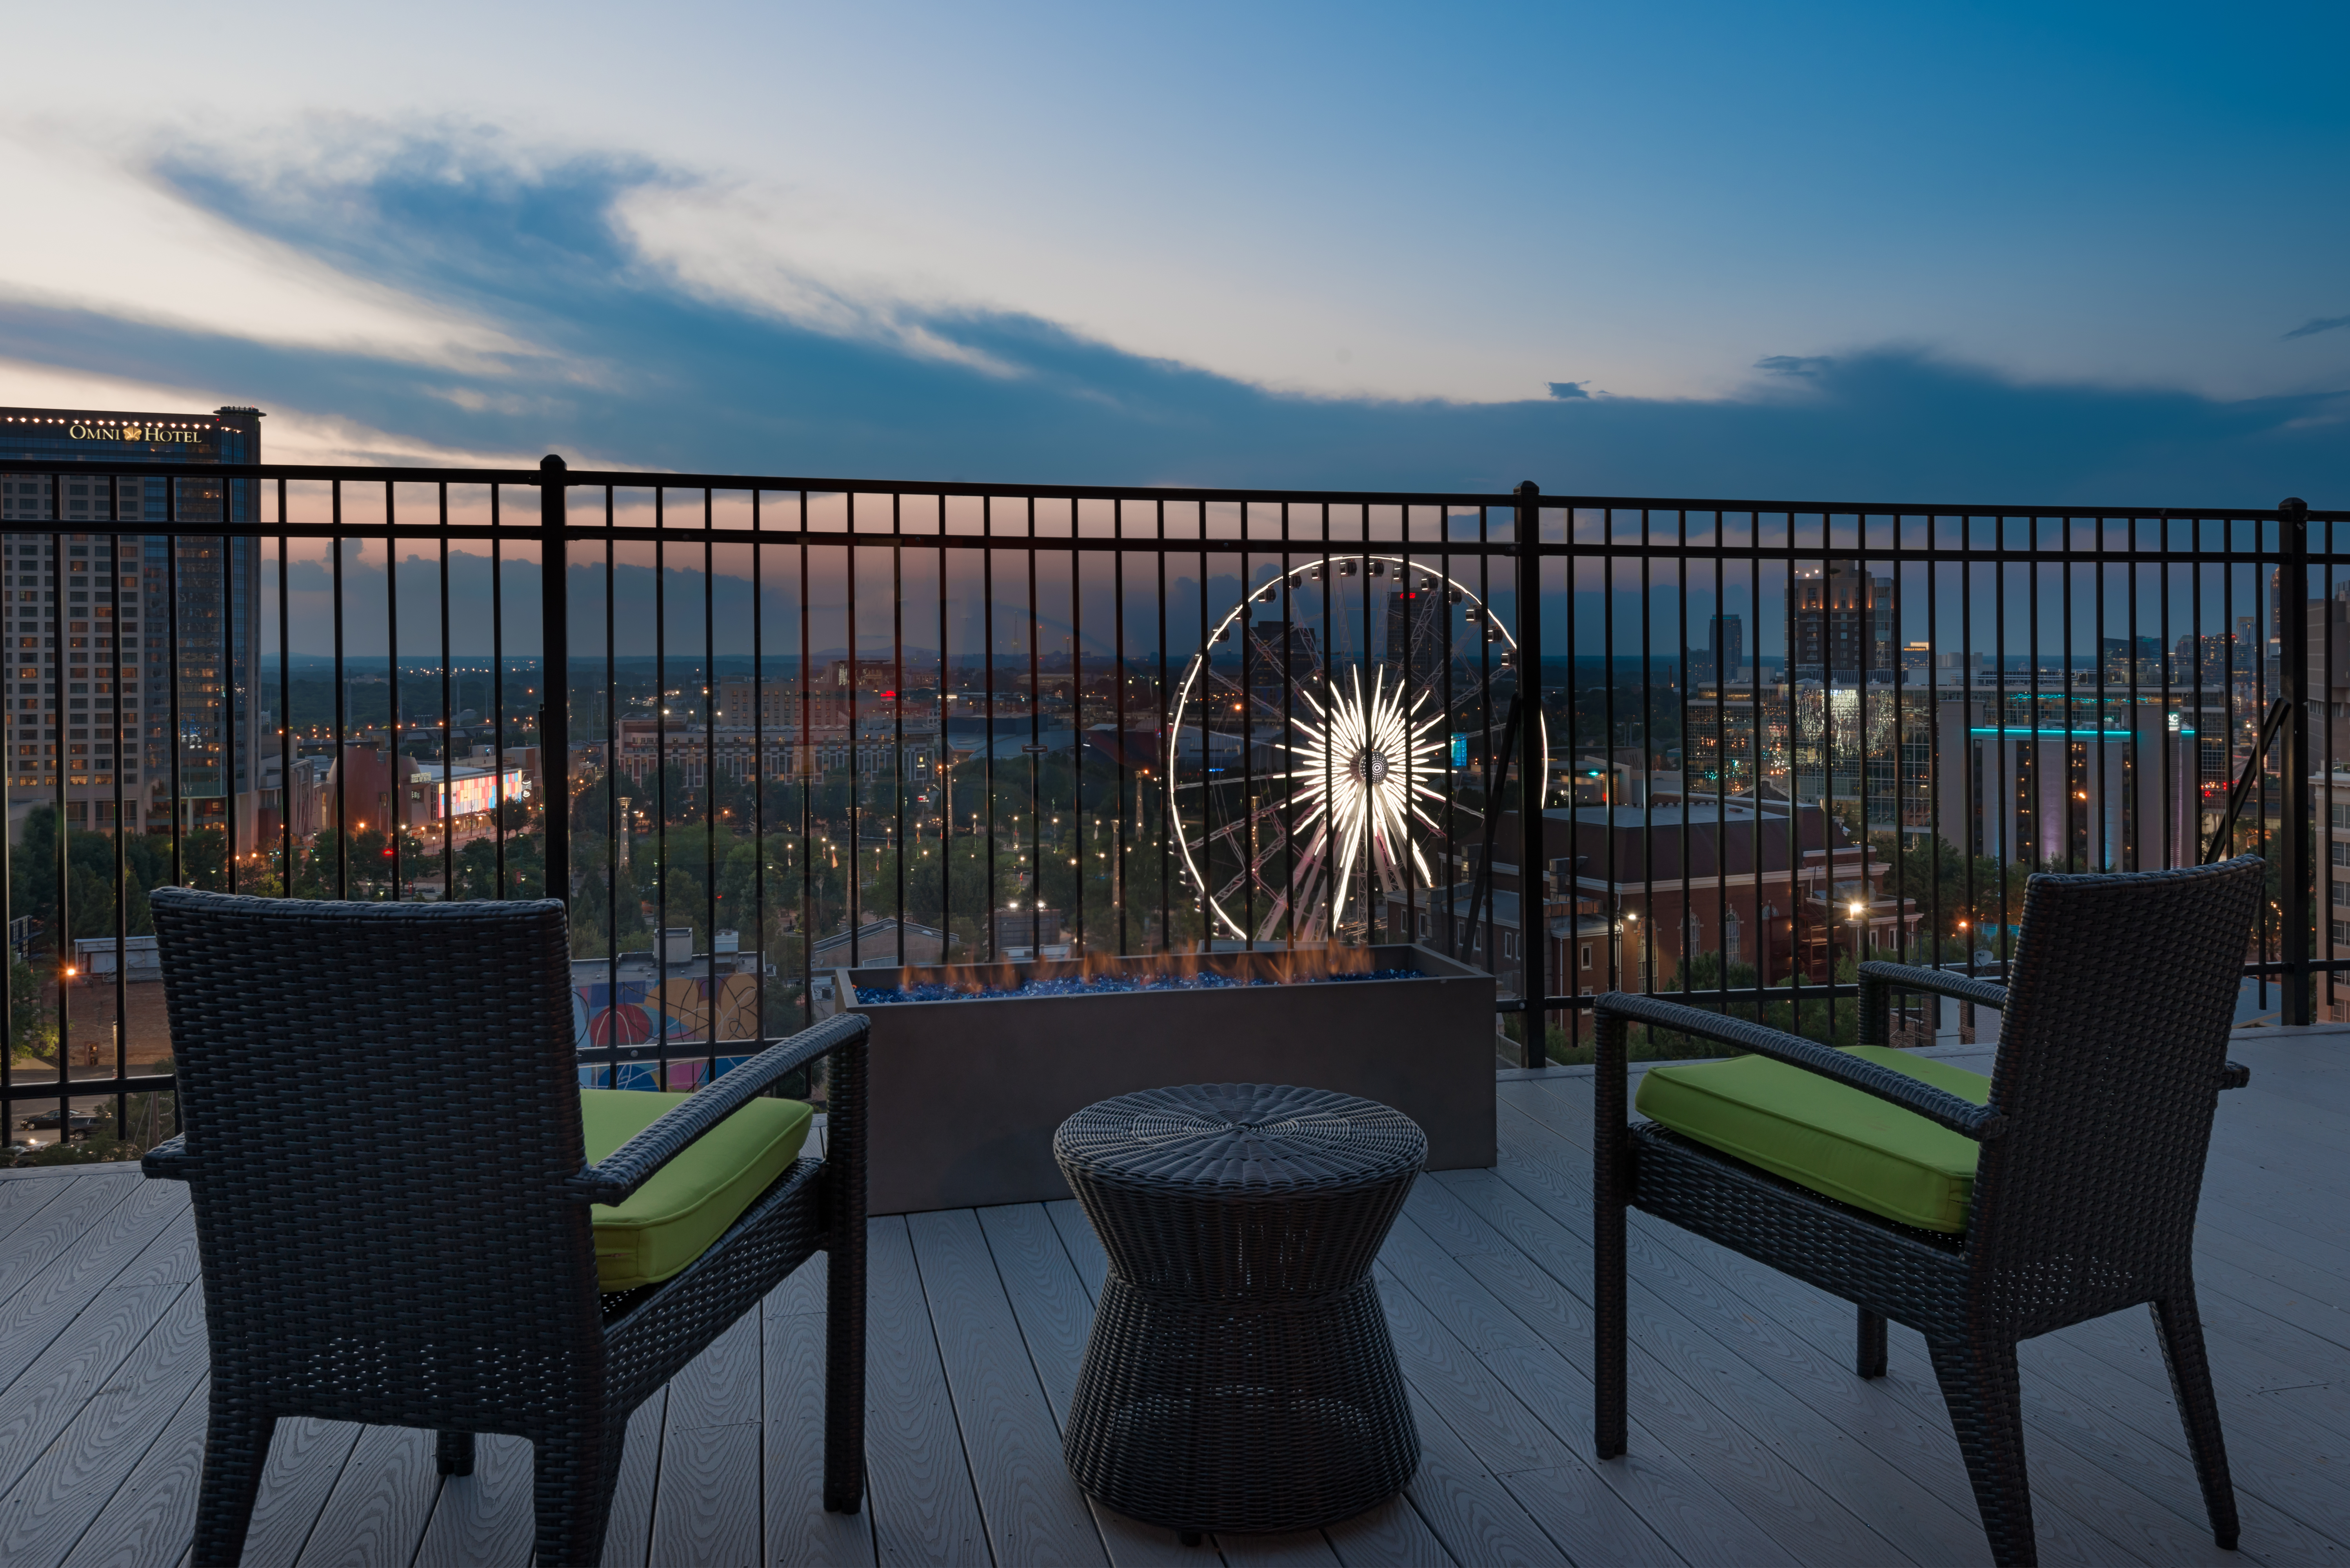  Home2 Suites by Hilton Atlanta Downtown, GA - Fire Pit on Roof Deck at Night